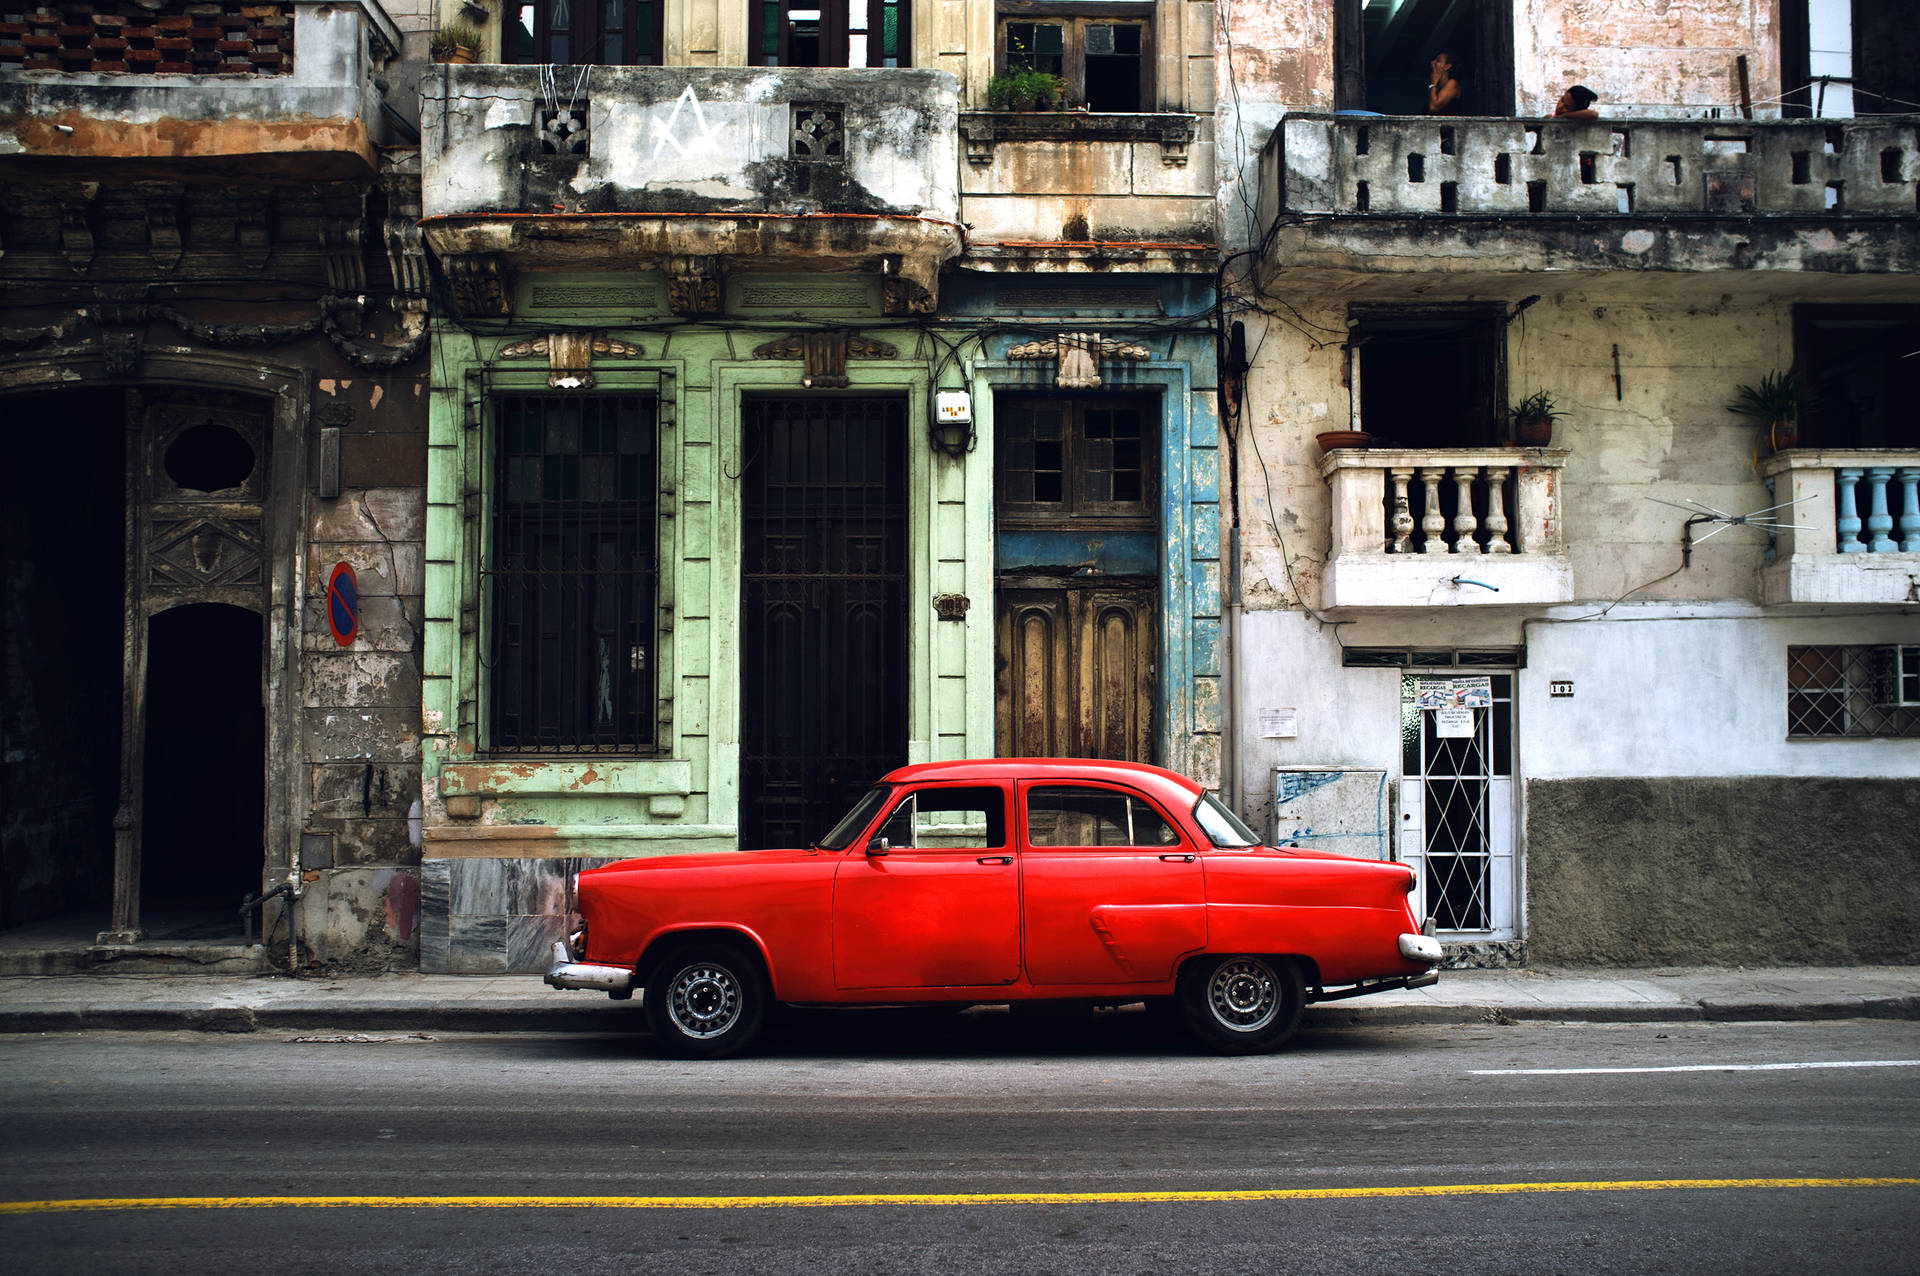 Car Parked On The Road In Cuba